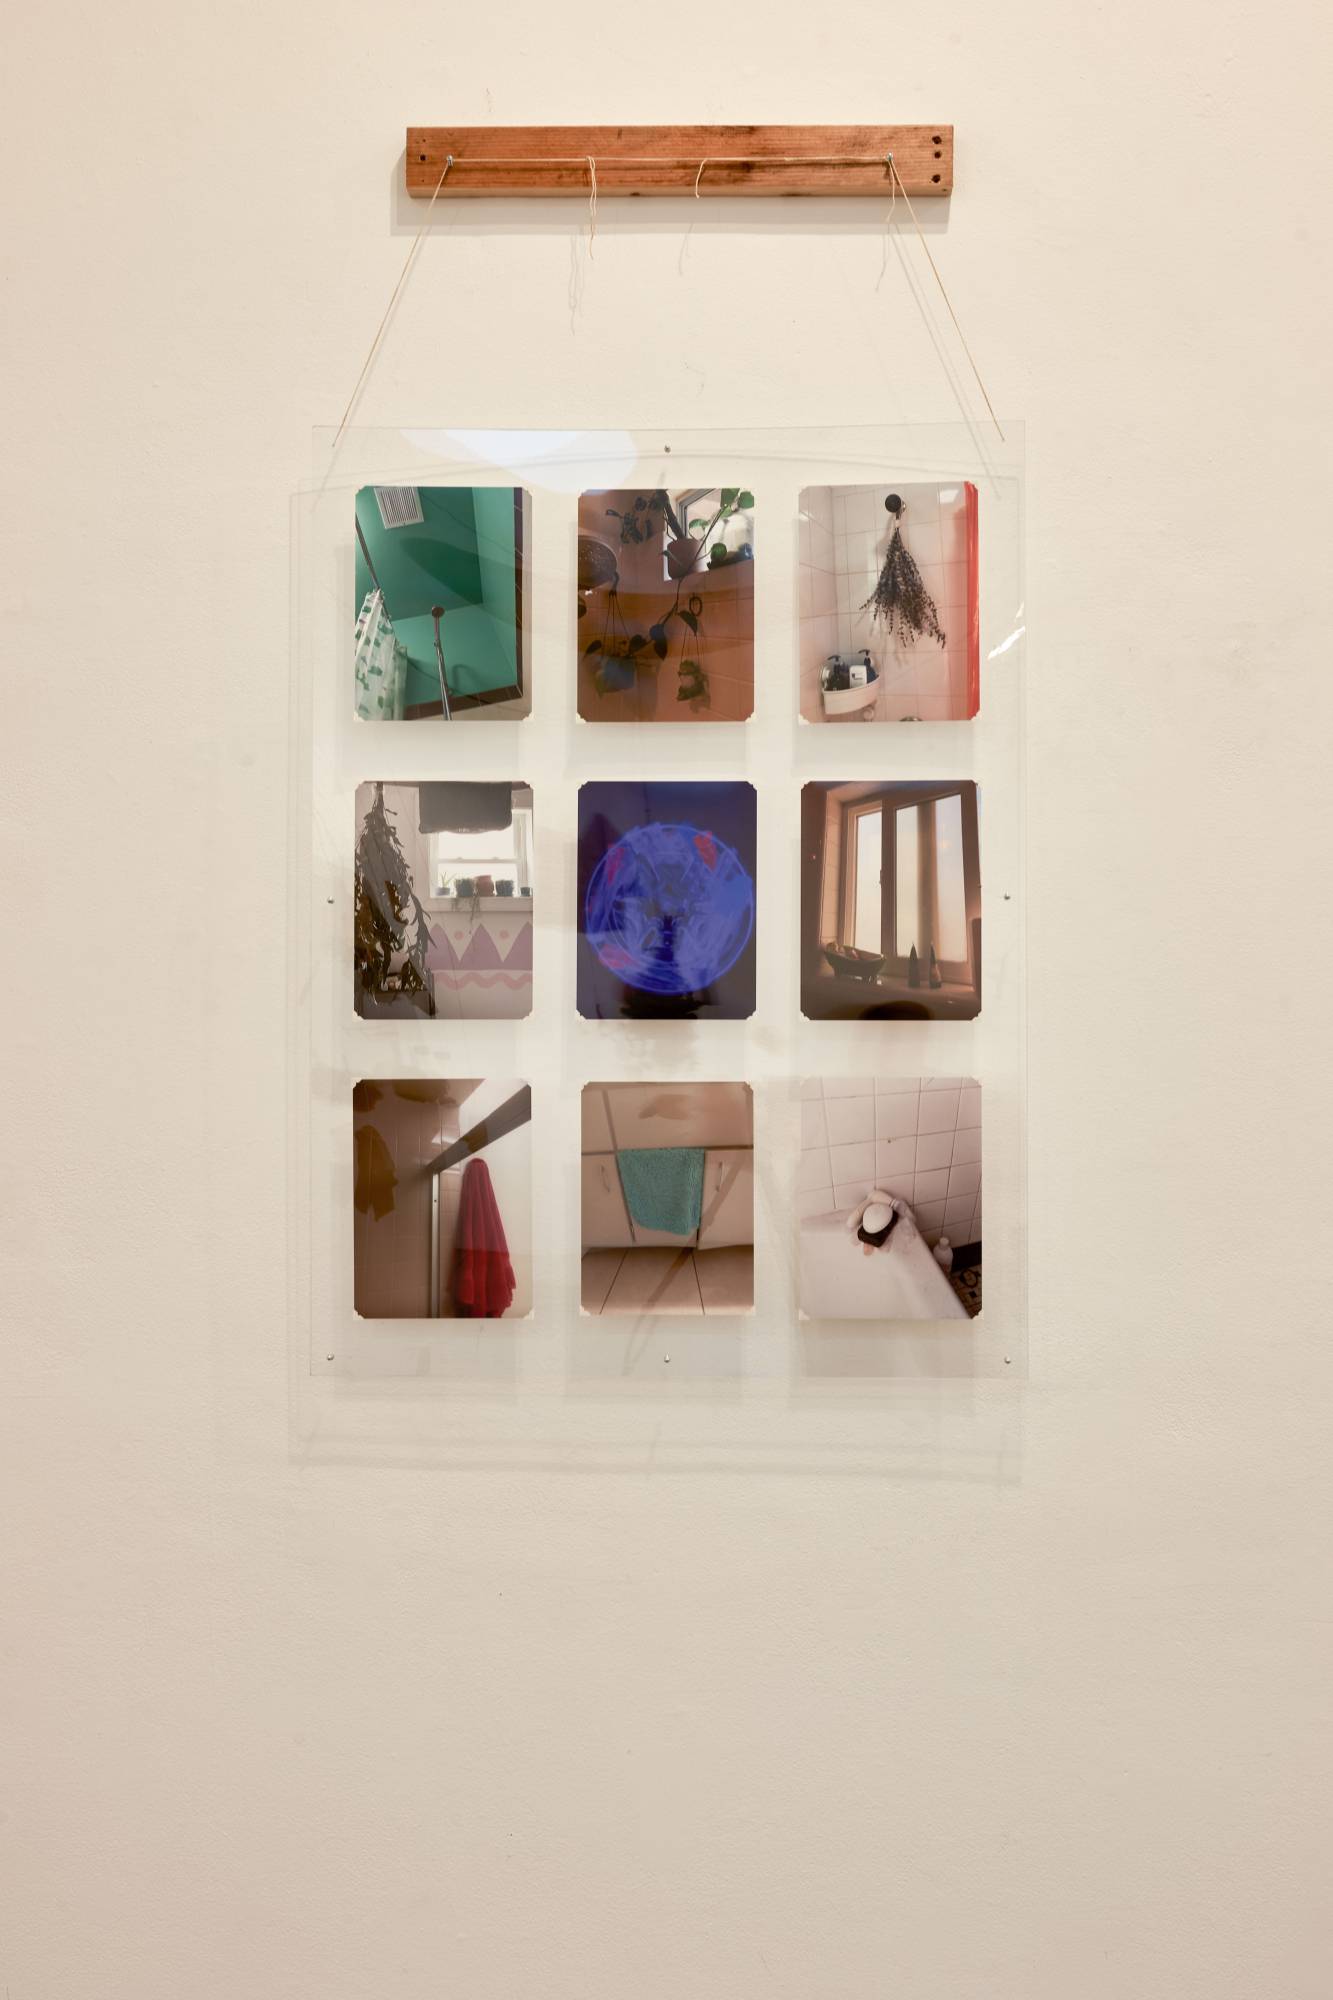 Leo Alas: Community Archive, 2022, 3' x 4' photos from loved ones in plexiglass